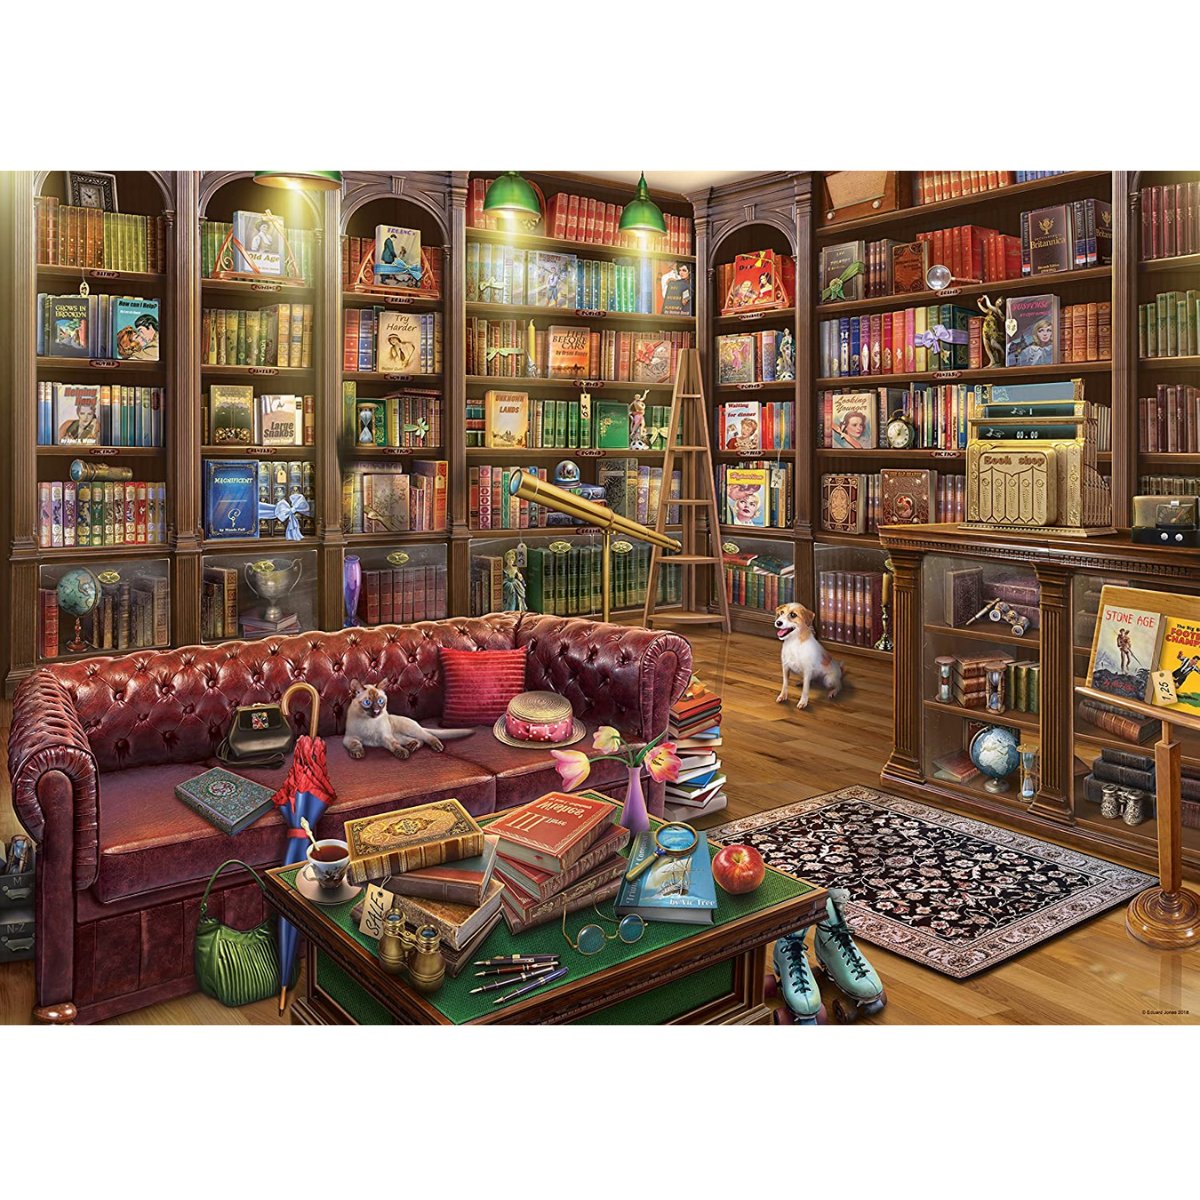 Ravensburger The Reading Room Jigsaw Puzzle (1000 Pieces) - Phillips Hobbies